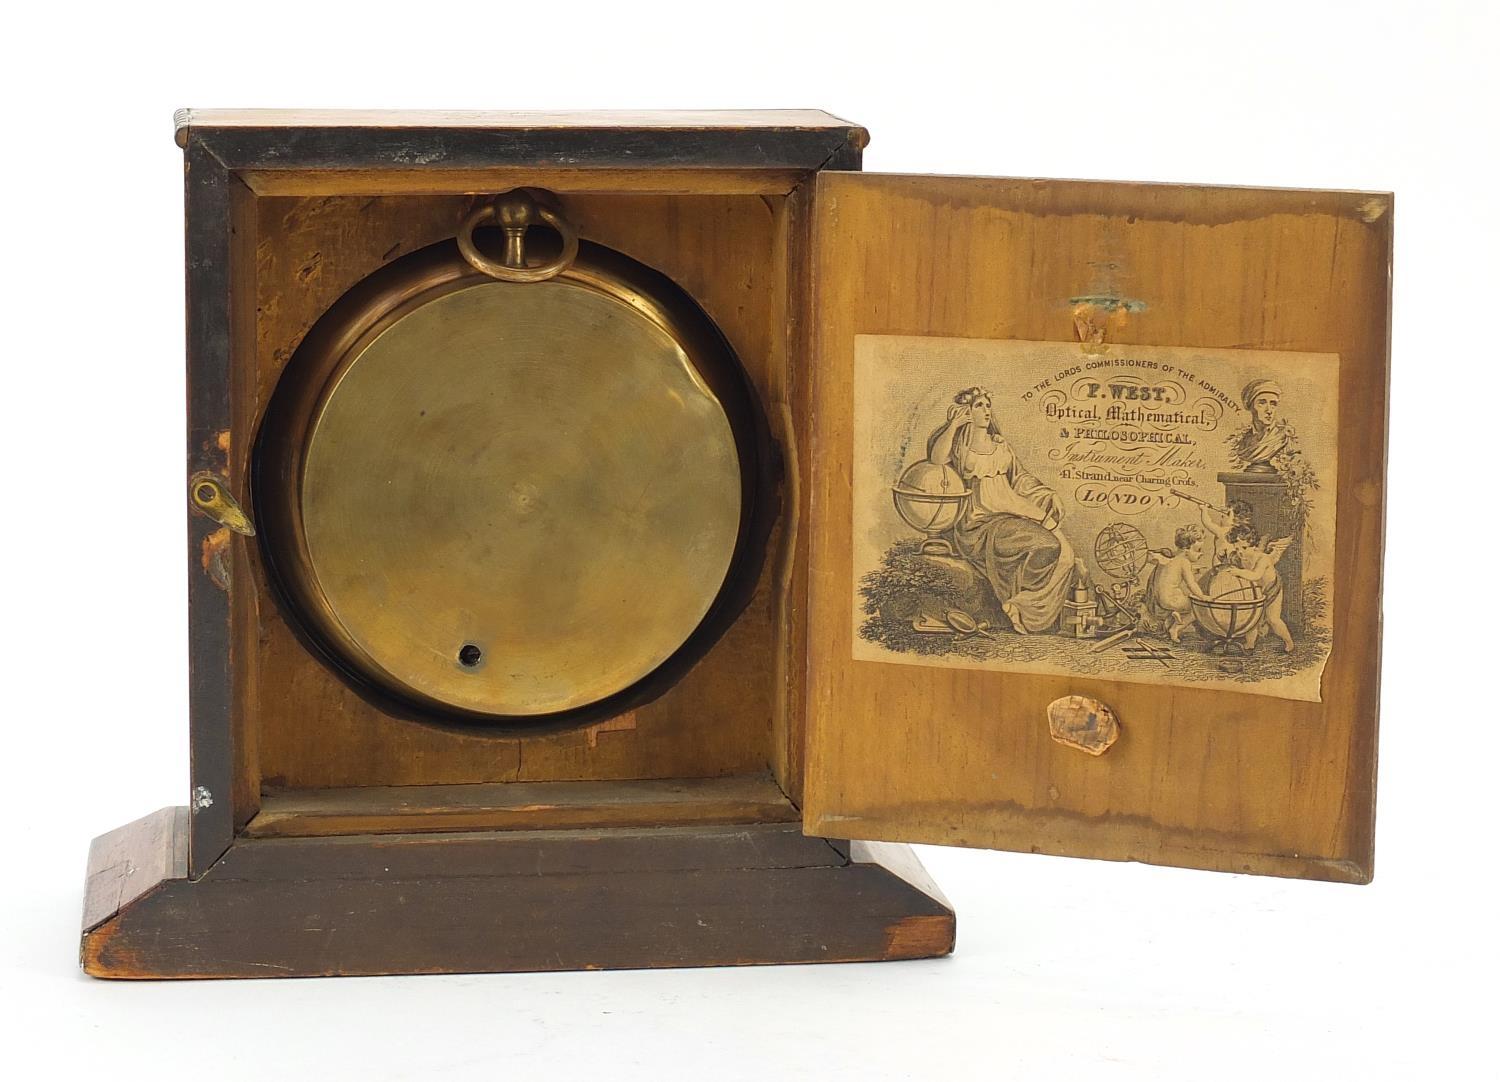 19th century brass cased aneroid barometer with enamelled dial housed in a satinwood and rosewood - Image 3 of 4